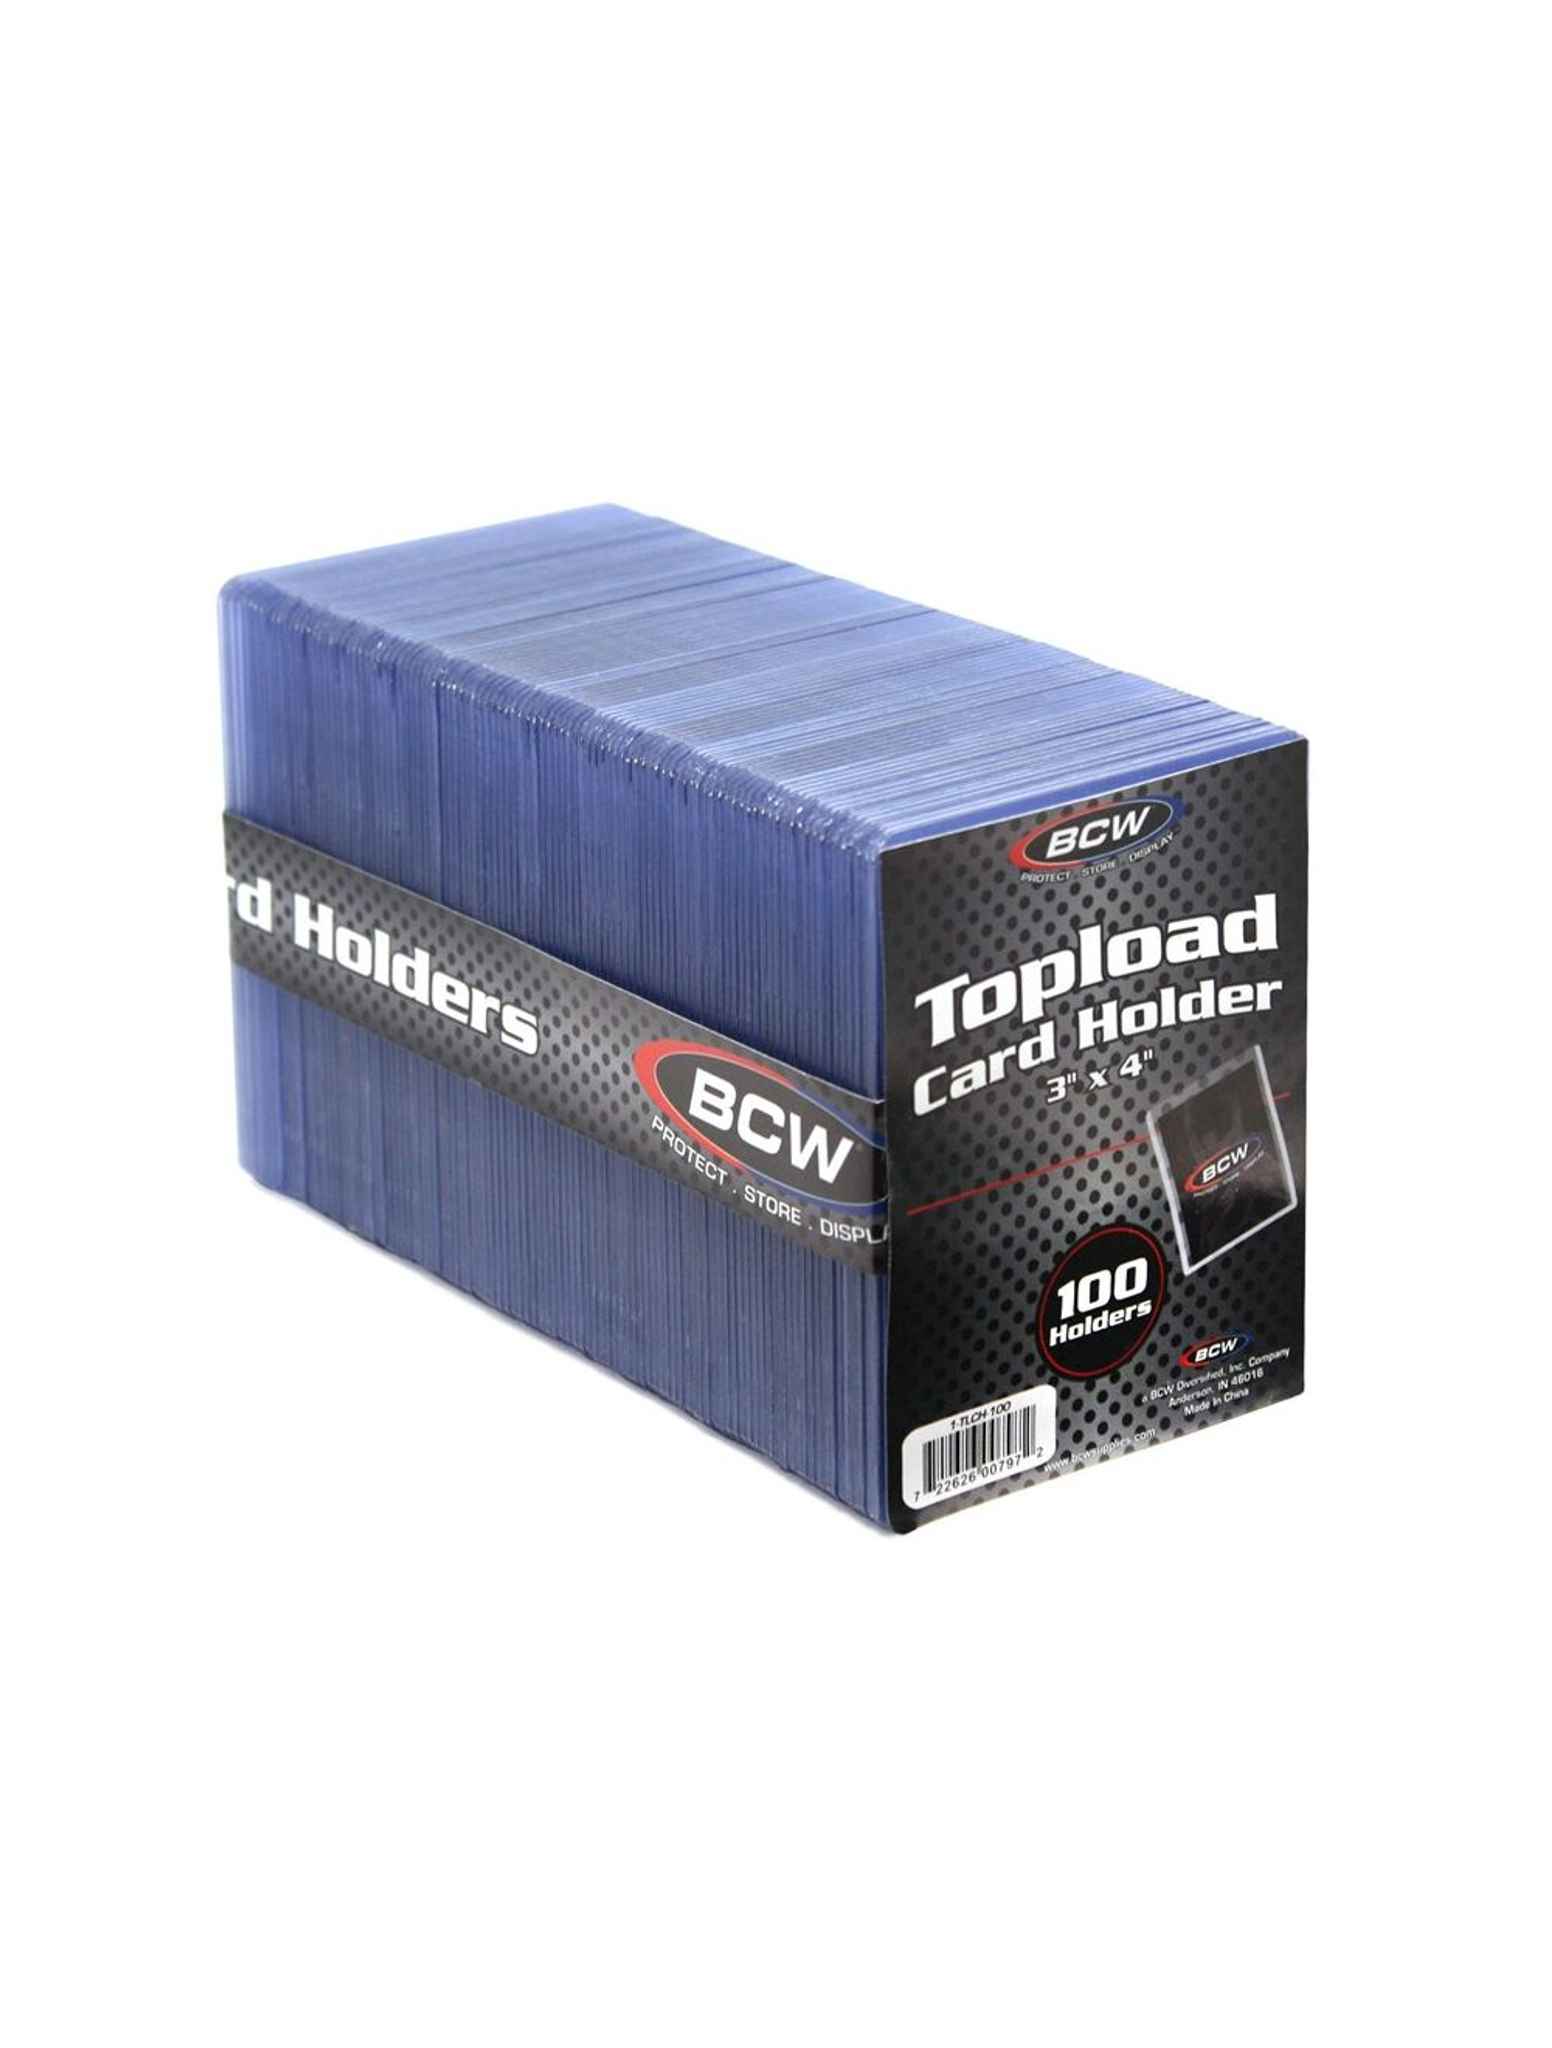 4X6 BCW Rigid Photograph Toploaders 1-TLCH-4X6 25 New Sealed 